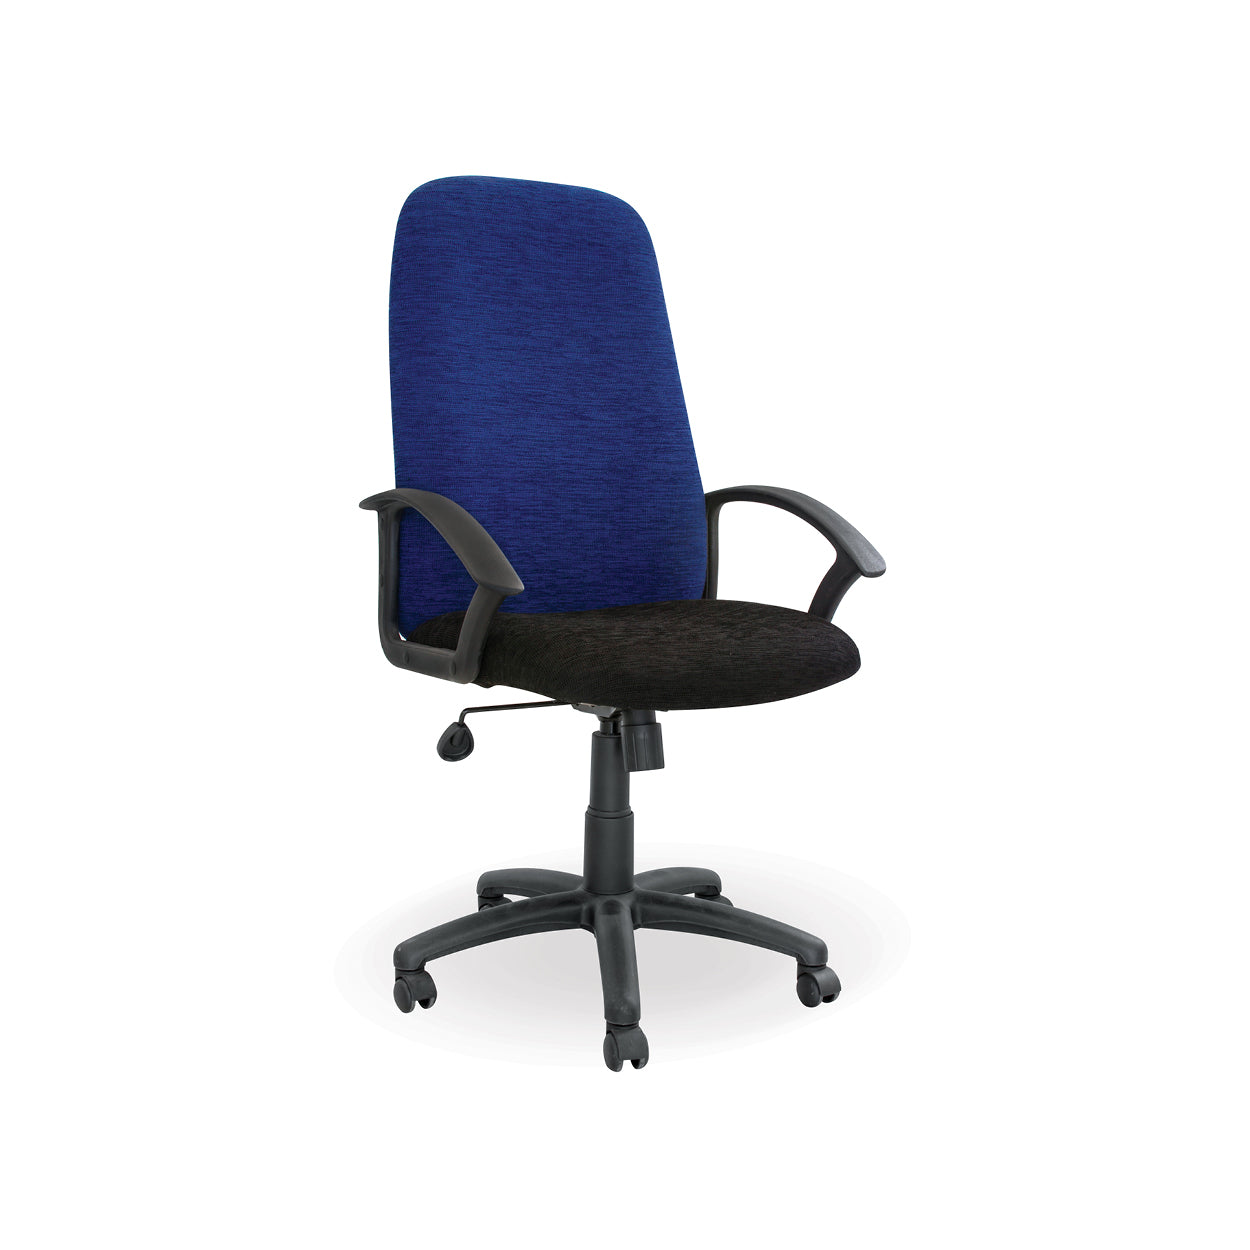 Hedcor Montego High back office chair